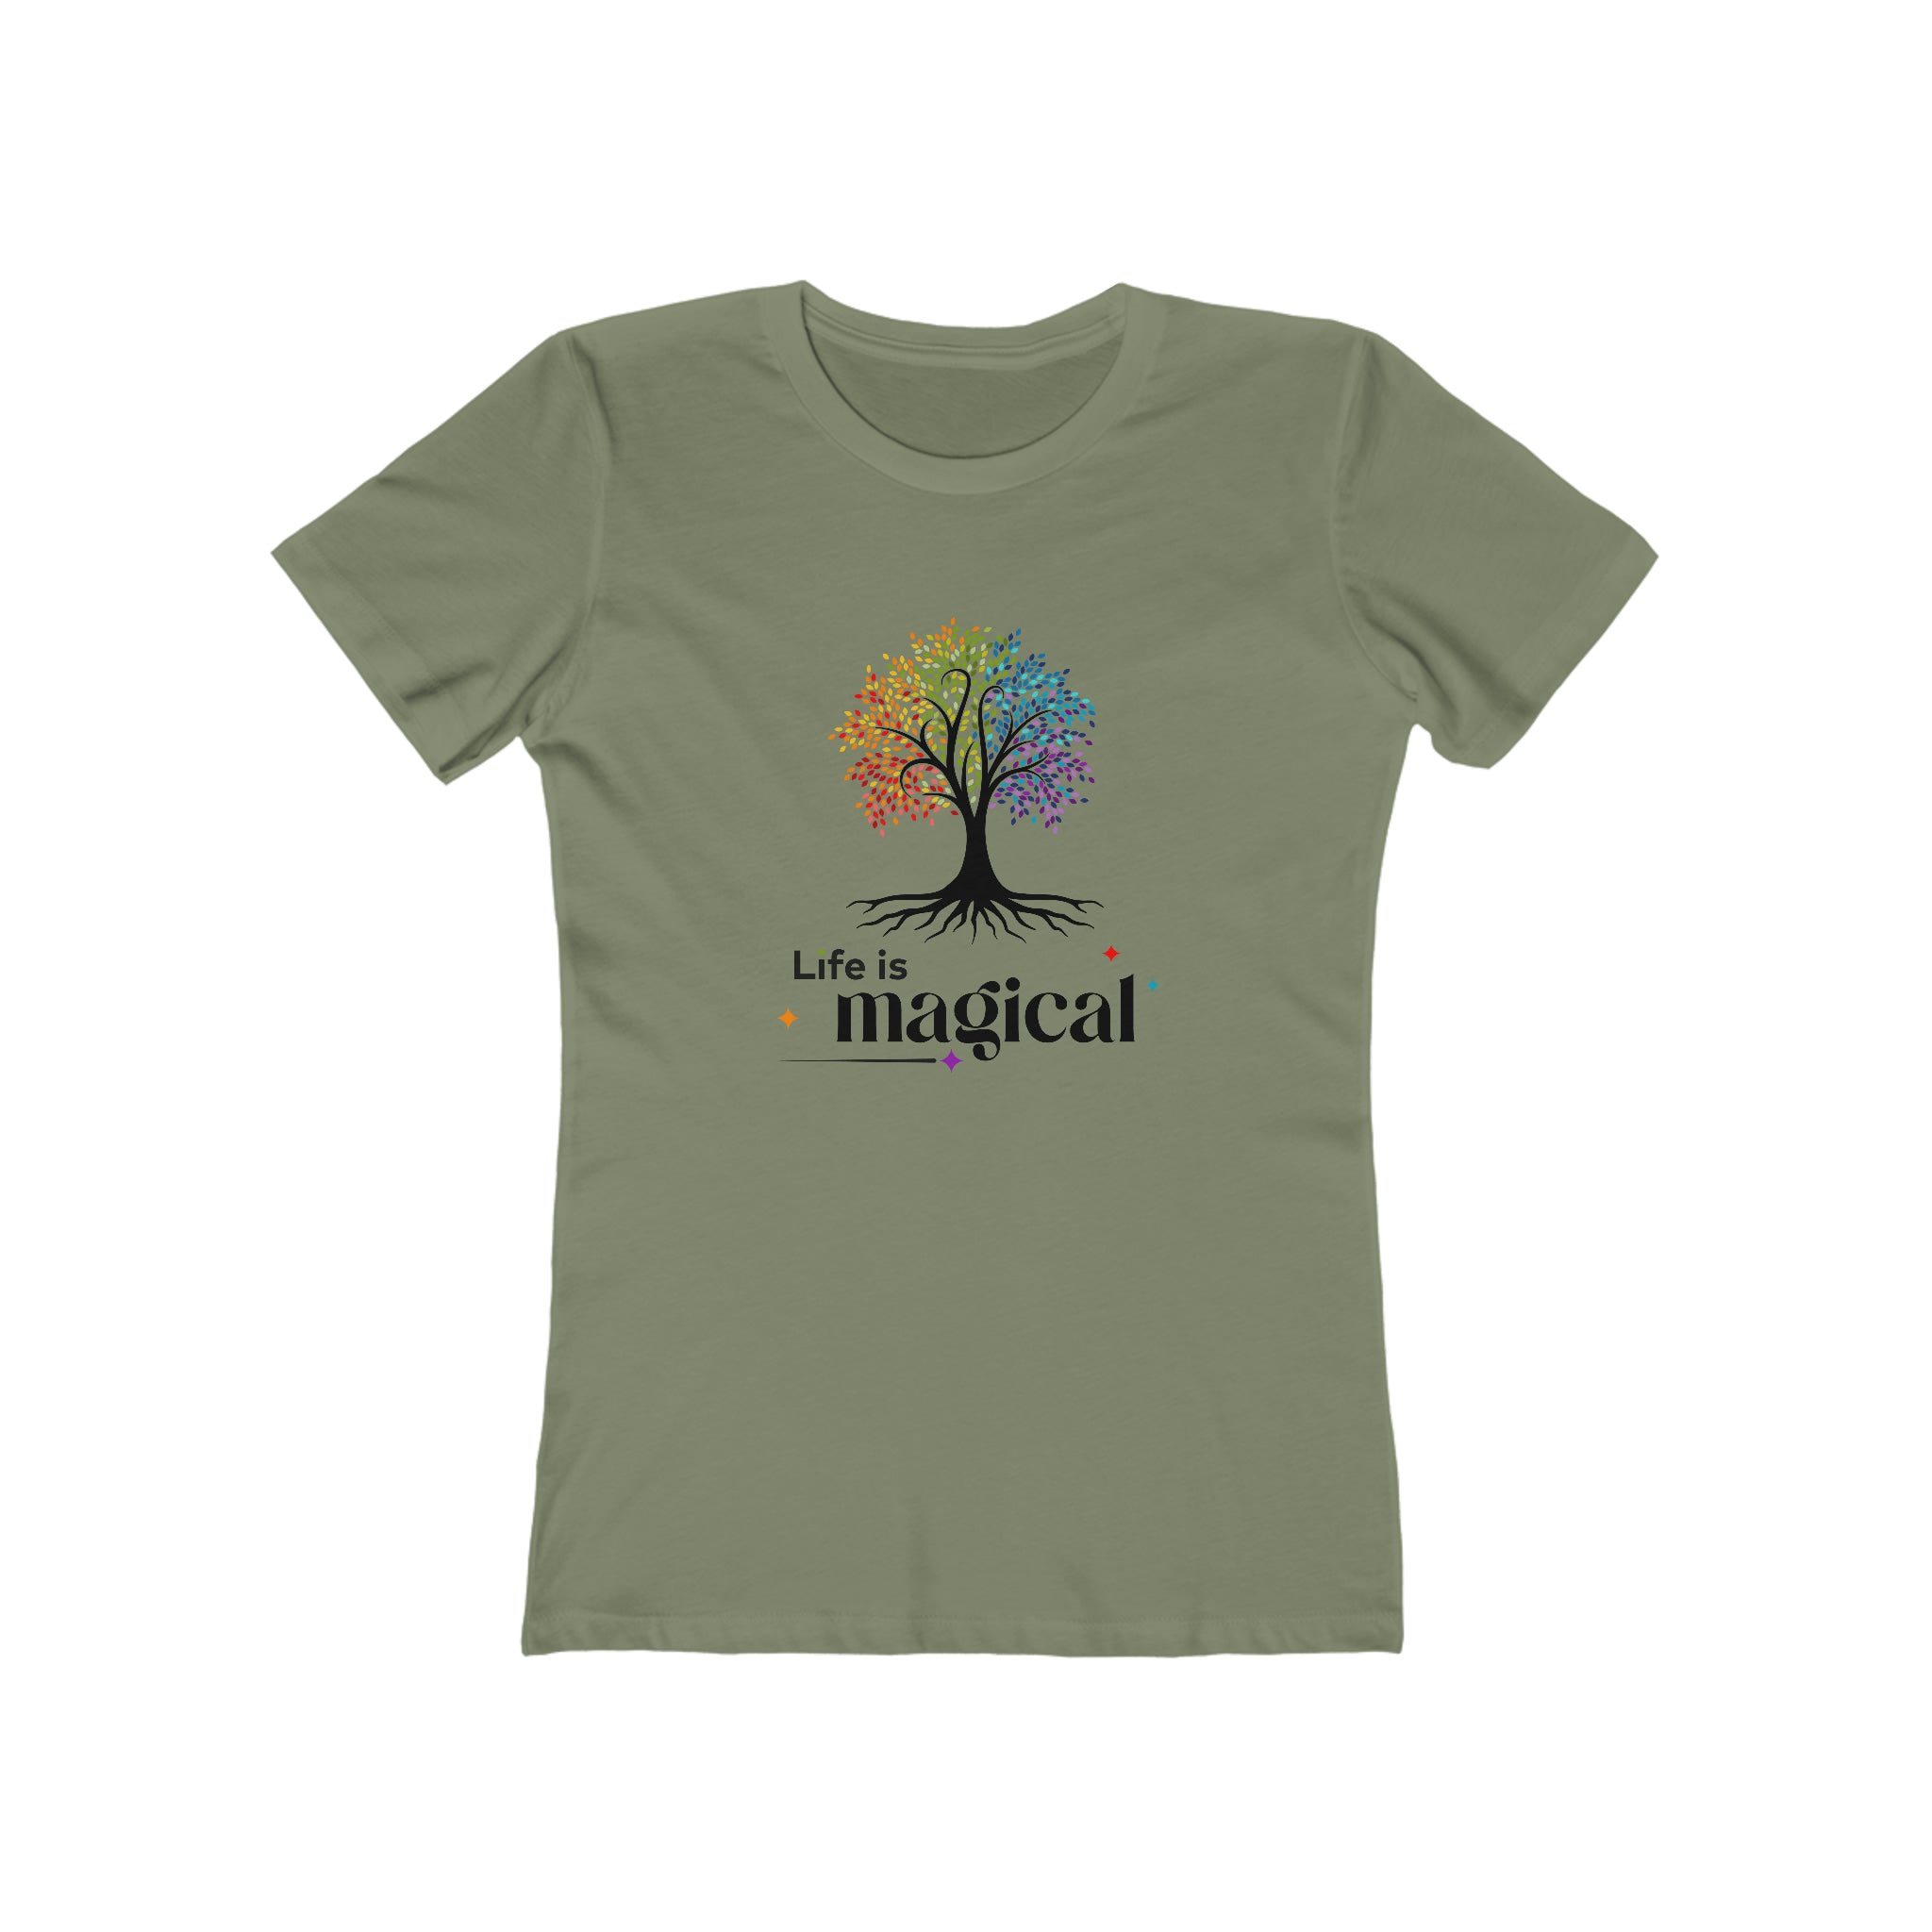 Life is Magical - The Tree : Women's 100% Cotton T-Shirt